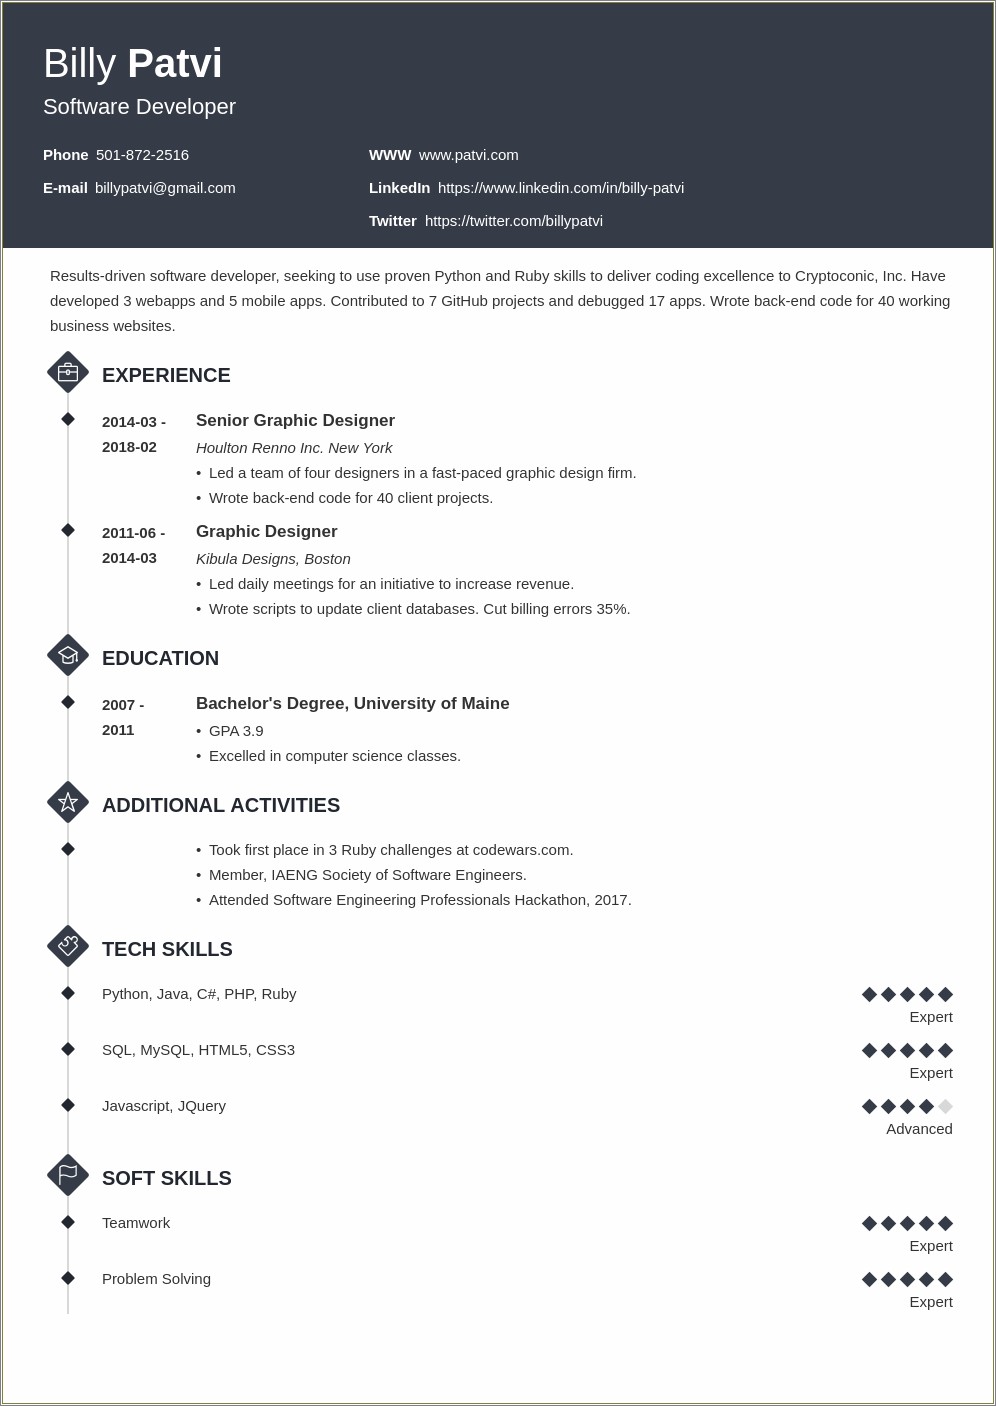 Professional Summary Resume Examples For Career Change